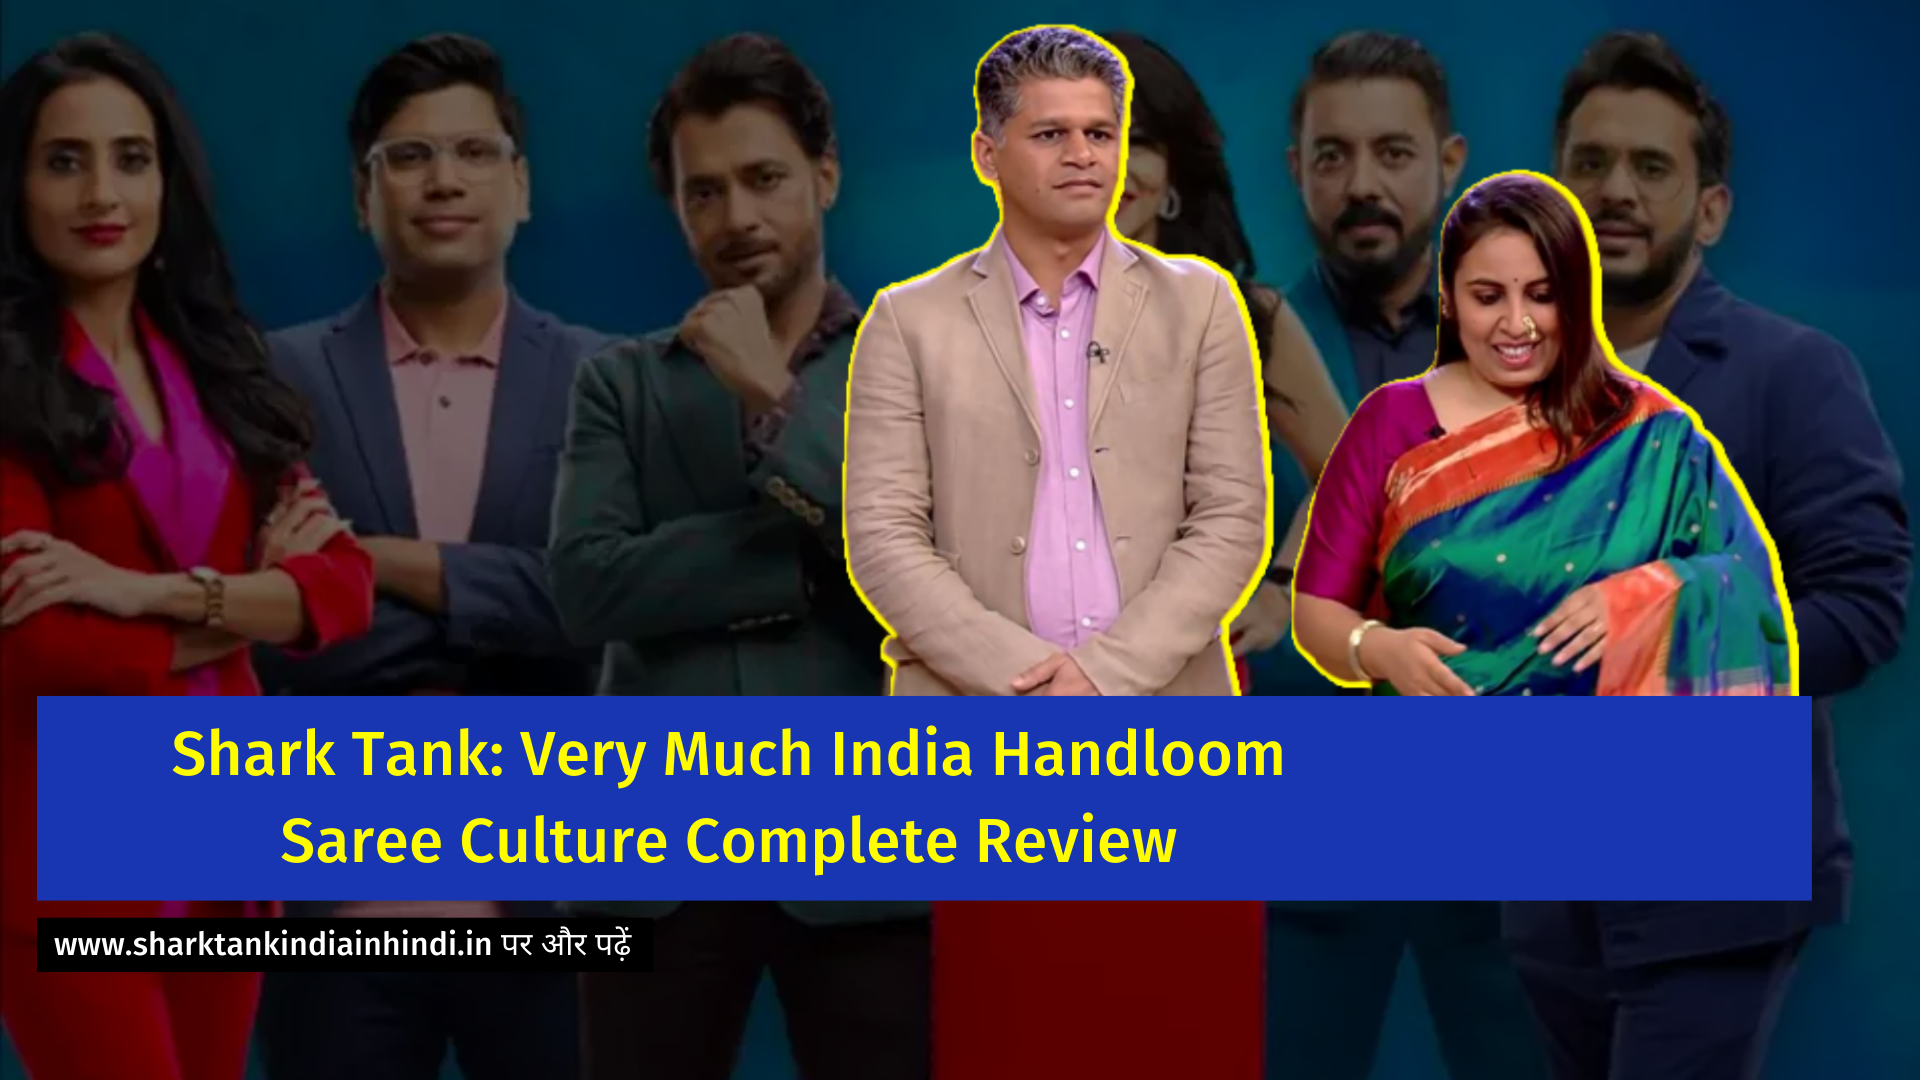 Shark Tank: Very Much India Handloom Saree Culture Complete Review